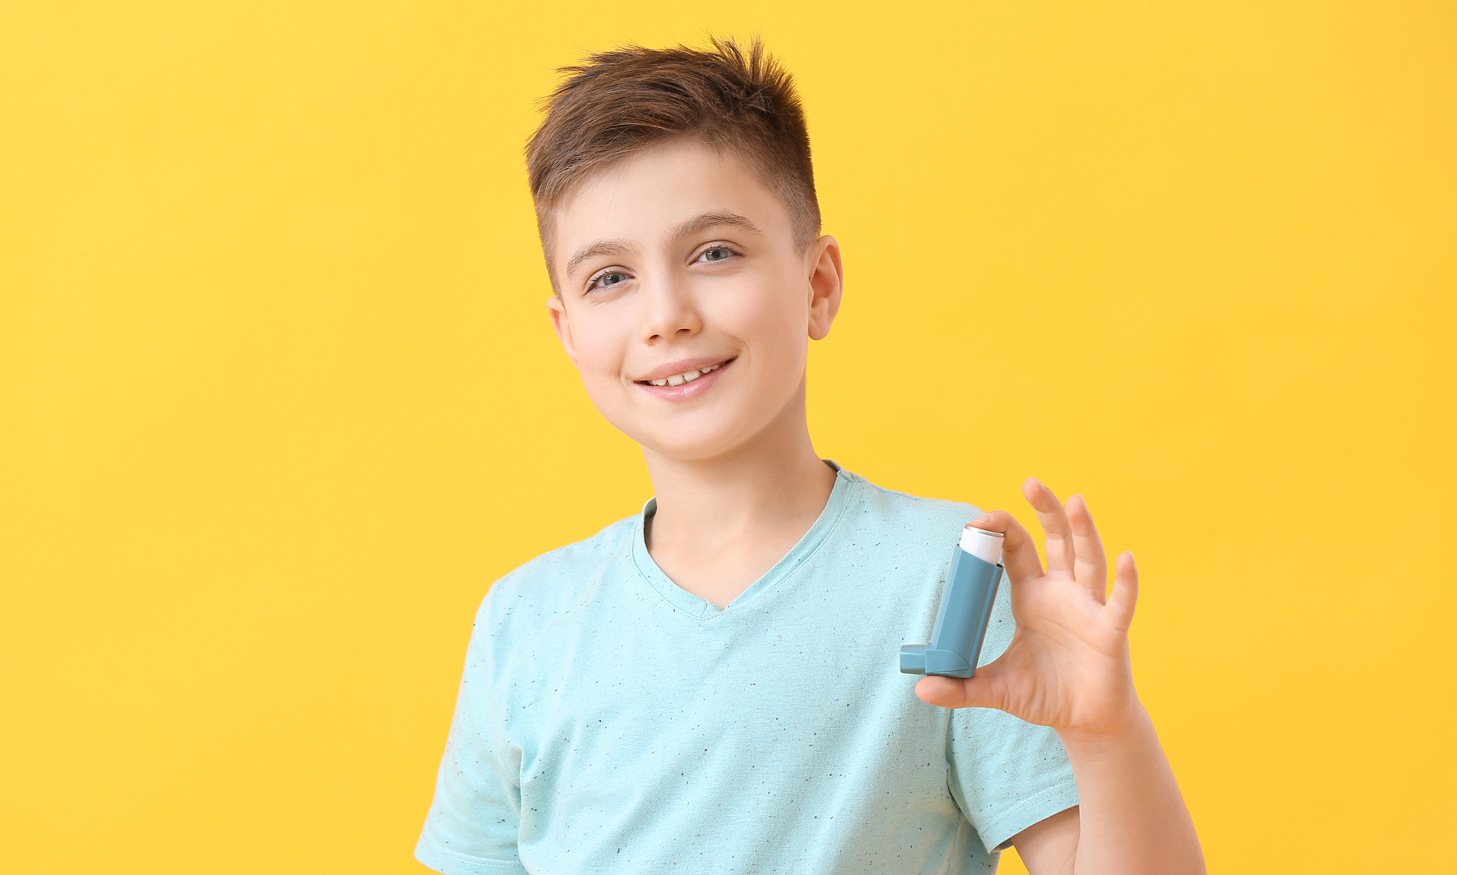 How will an allergist test for asthma?